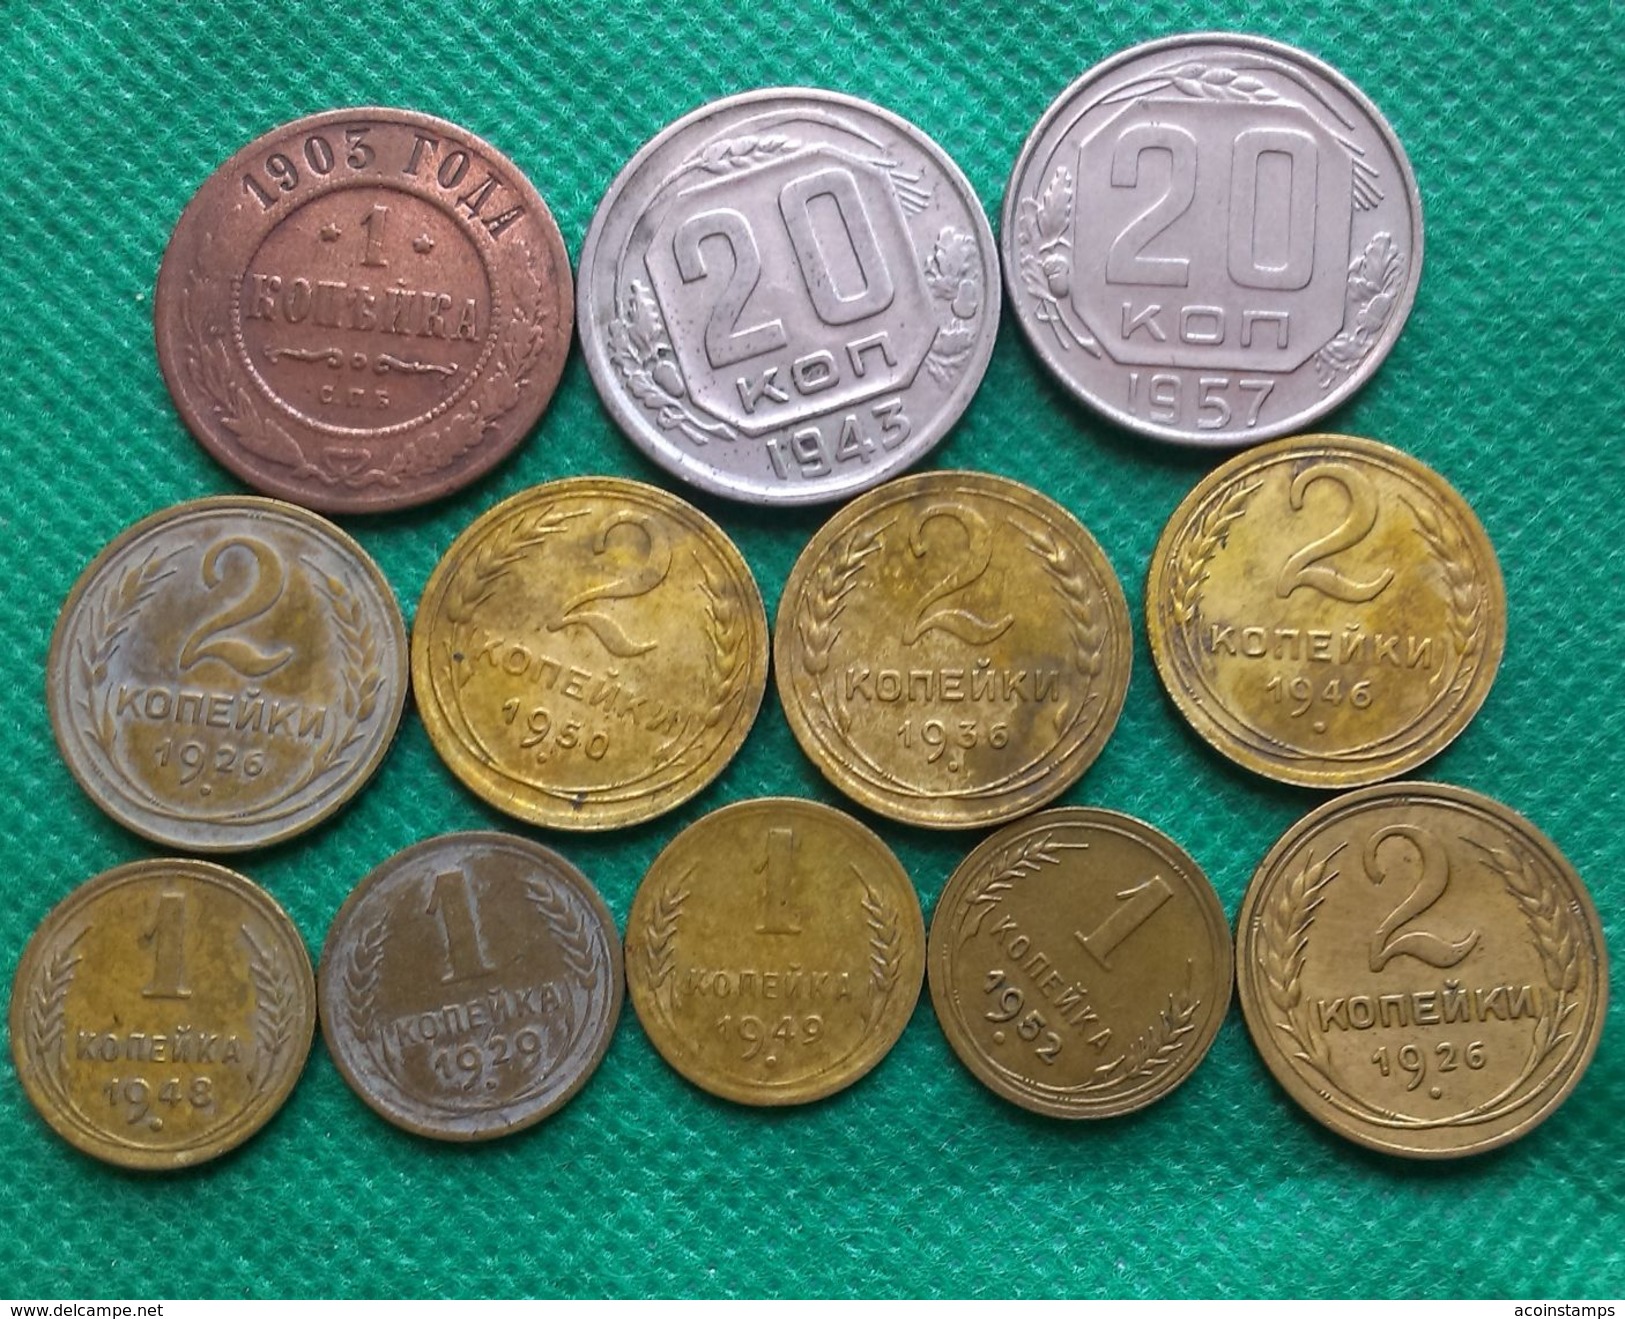 RUSSIA USSR COINS LOT 1903 1926 1929 1936 1943 1946 1948 1949 1950 1952 1957 - Russia